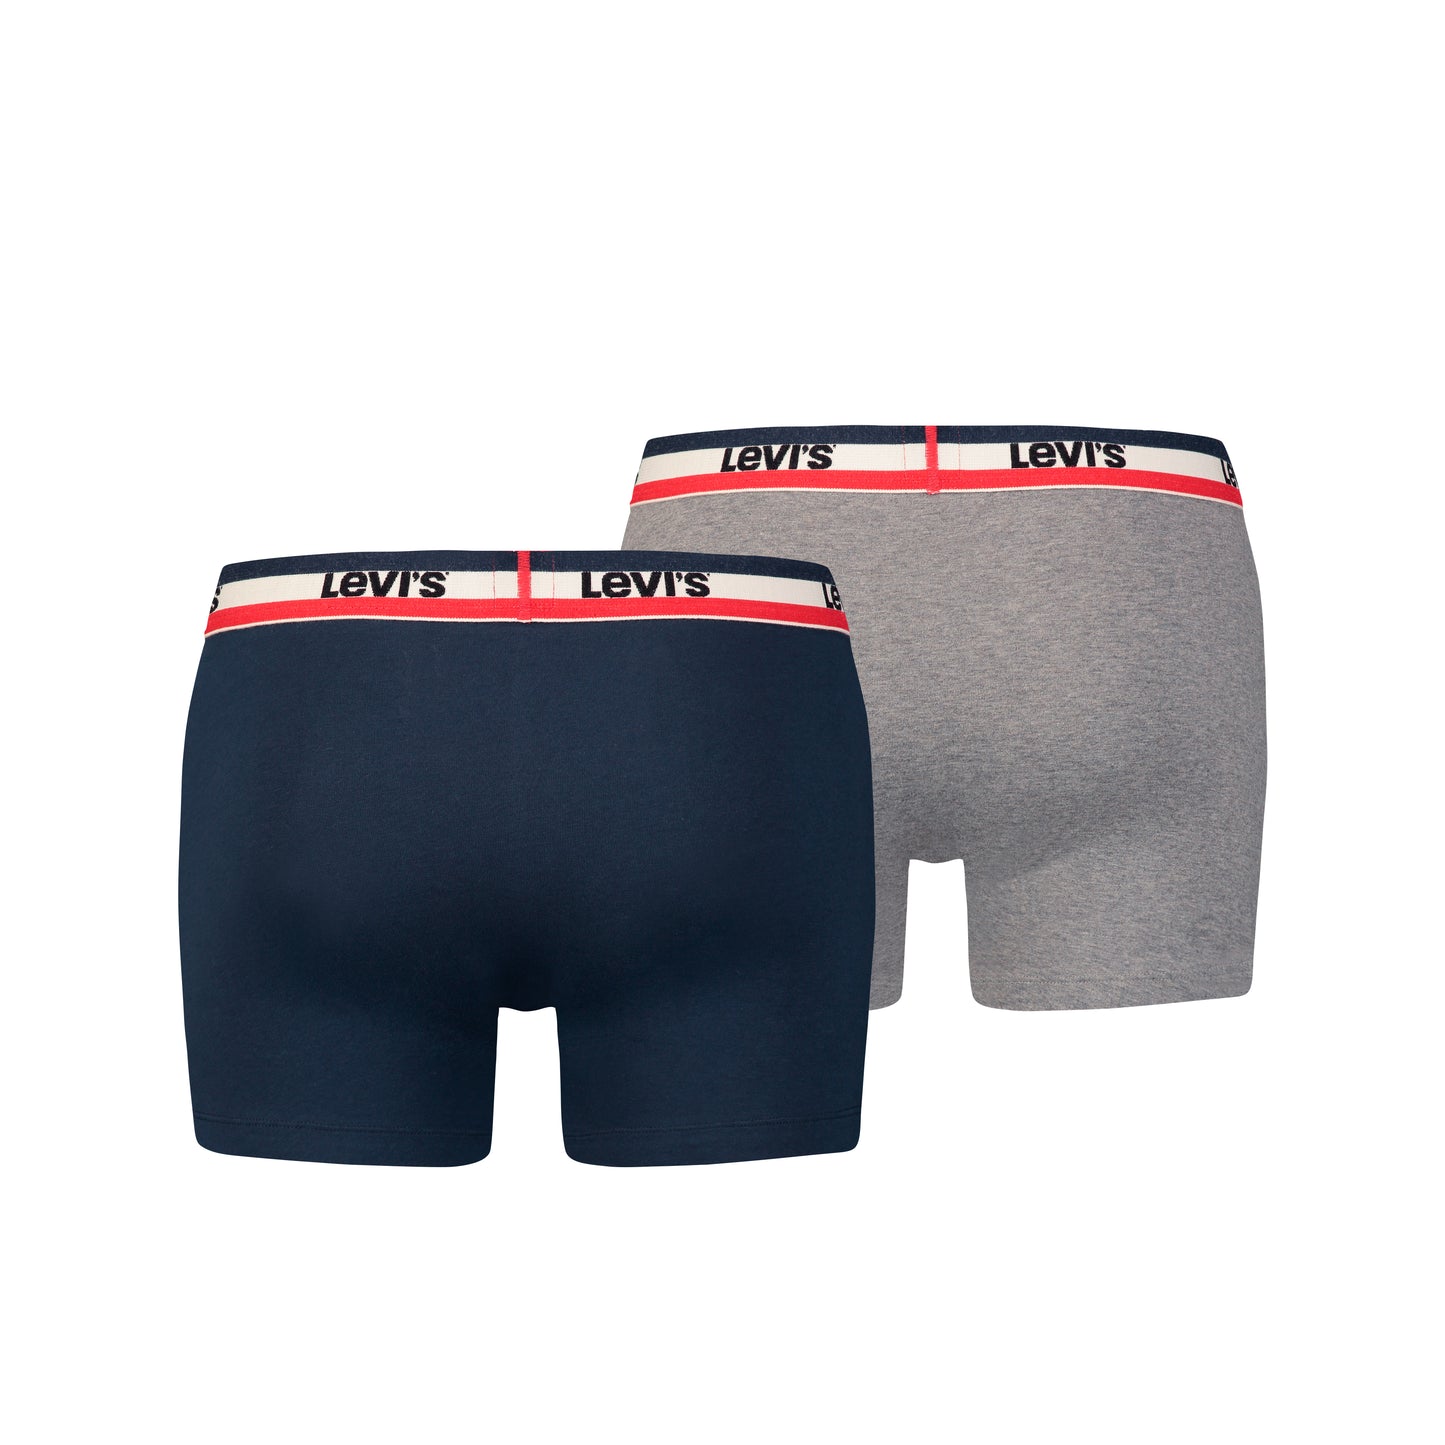 Levi's 905005001 198 Blue Boxer Brief Two Pack